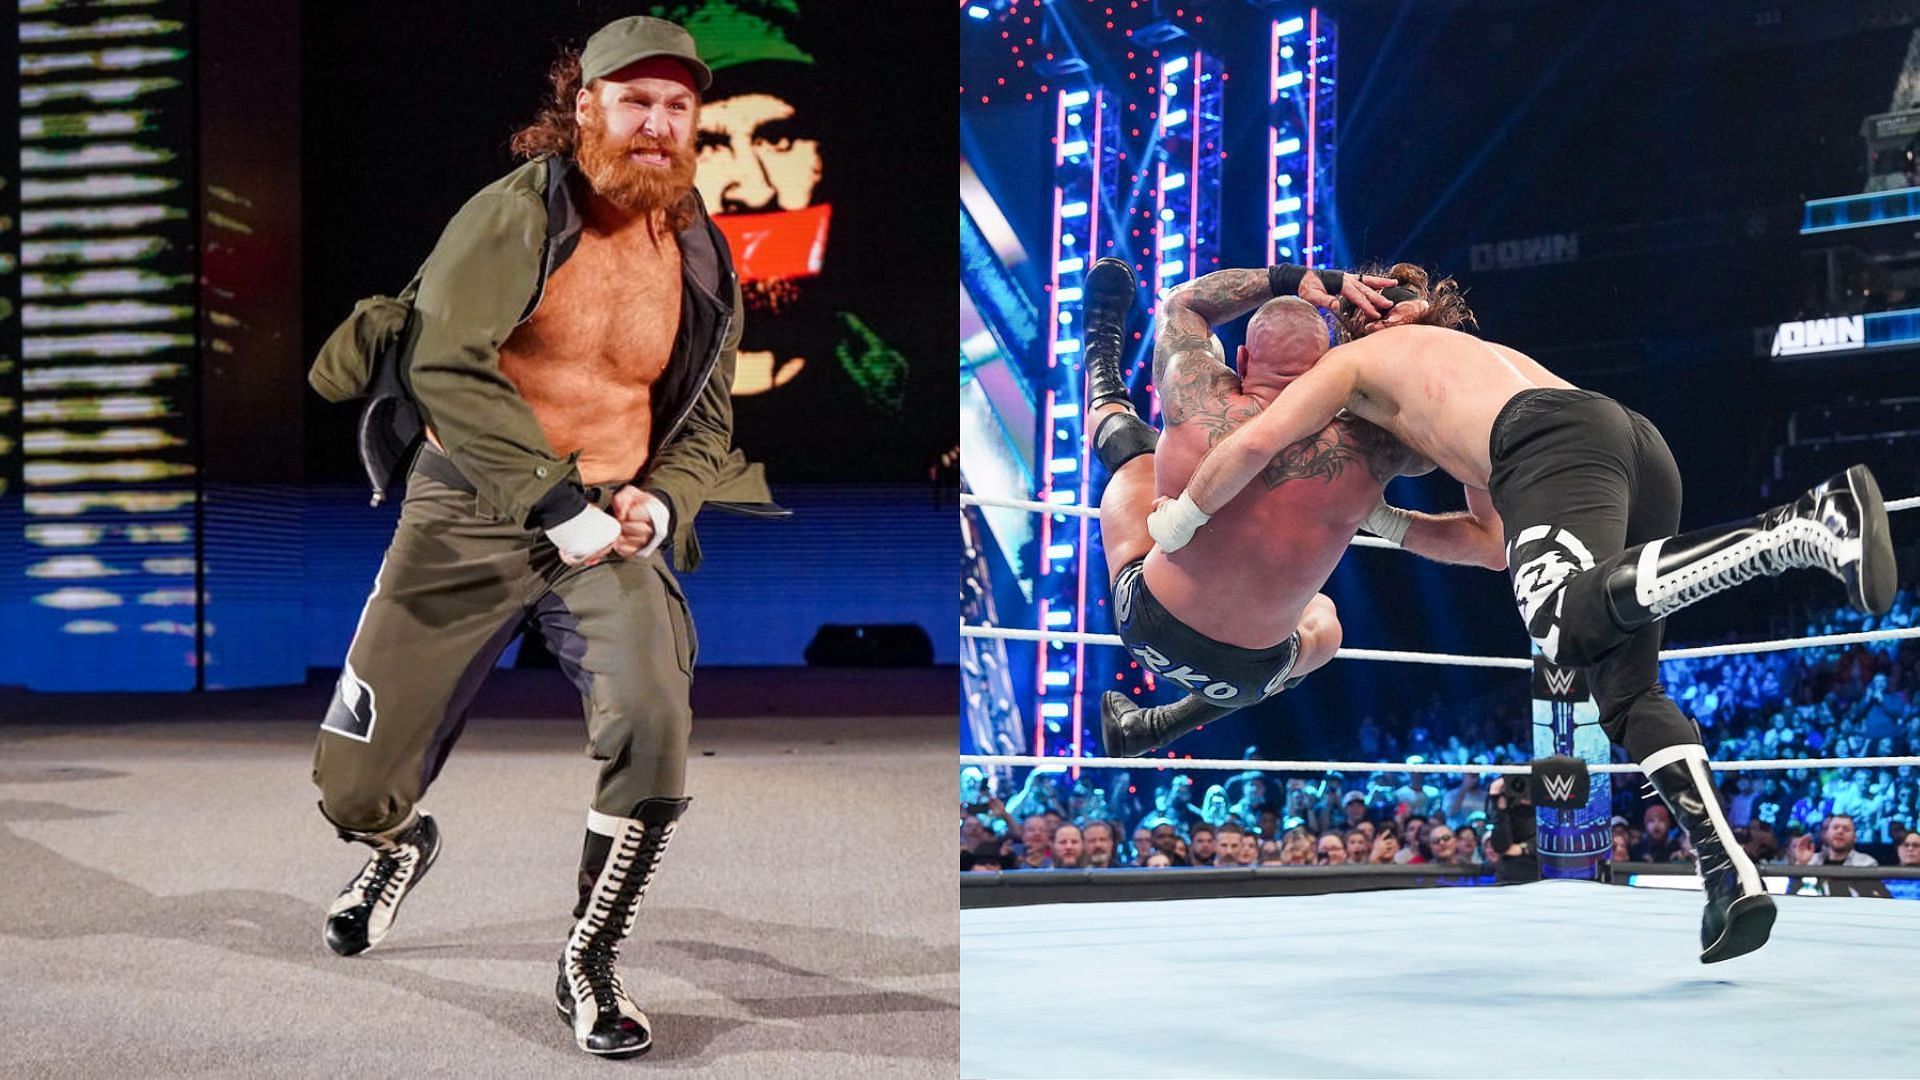 Sami Zayn failed to qualify for the Elimination Chamber Match